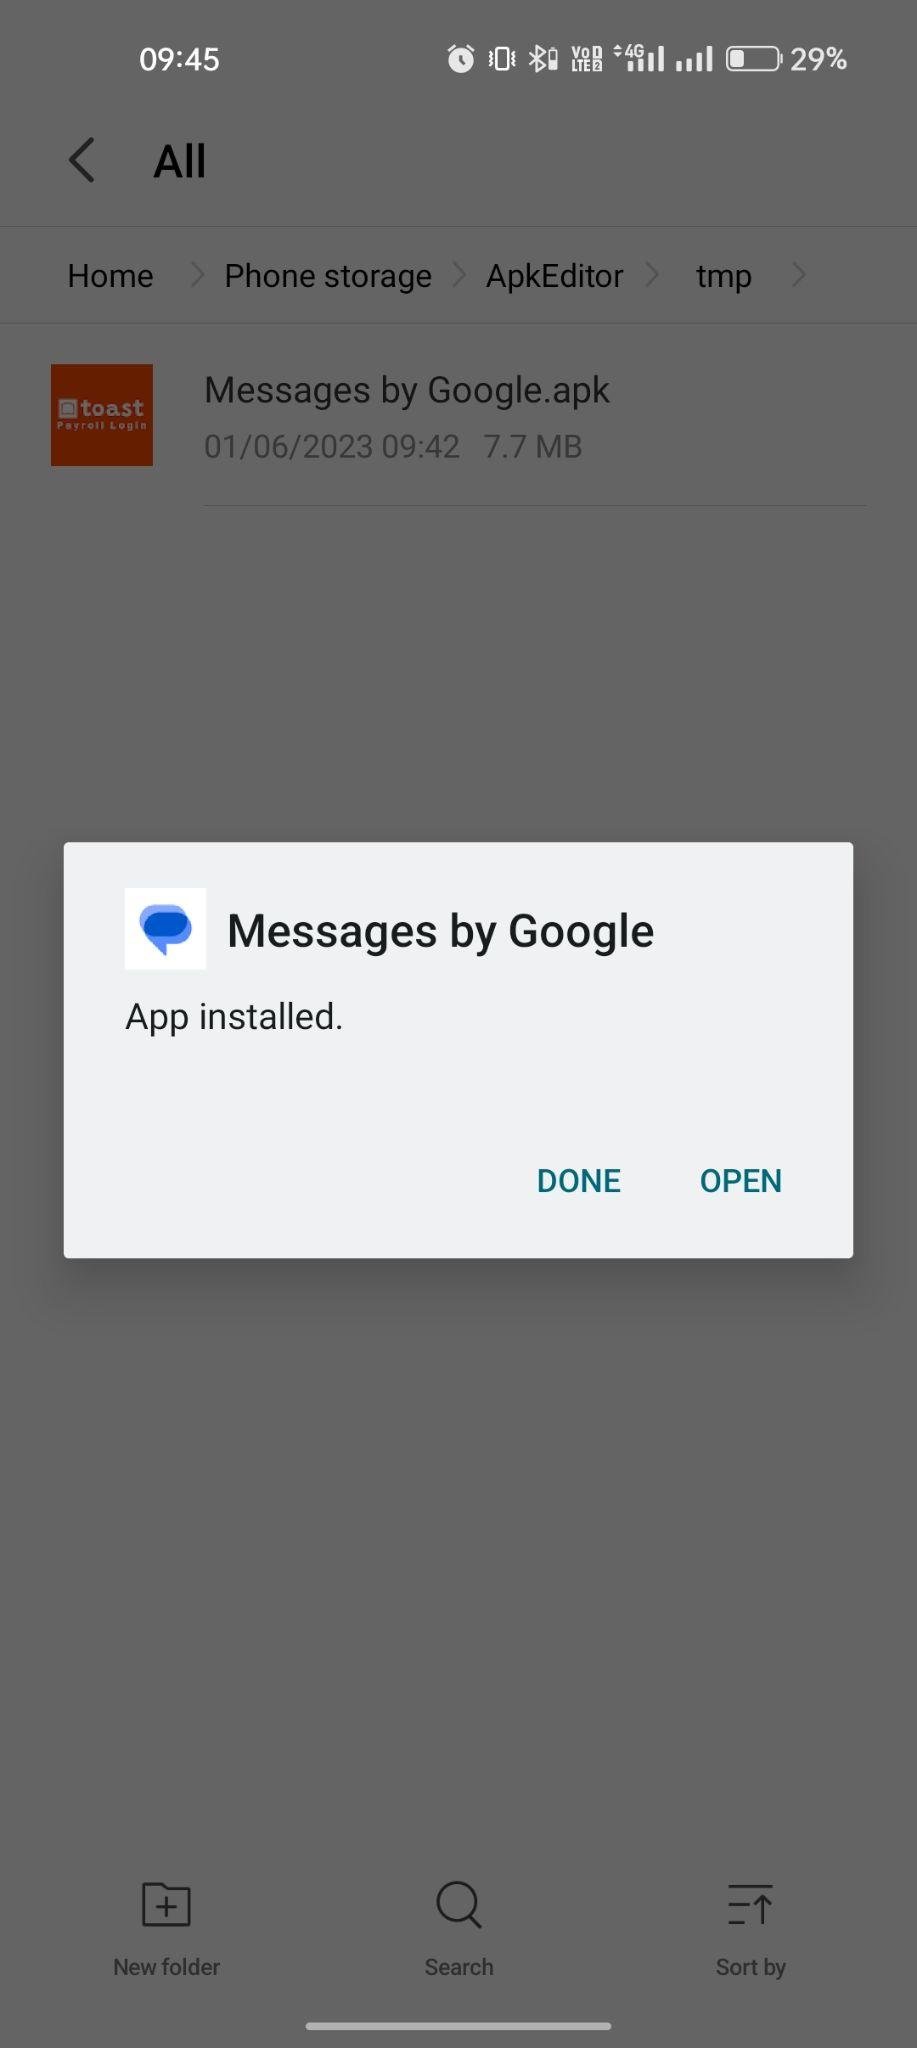 Messages by Google apk installed